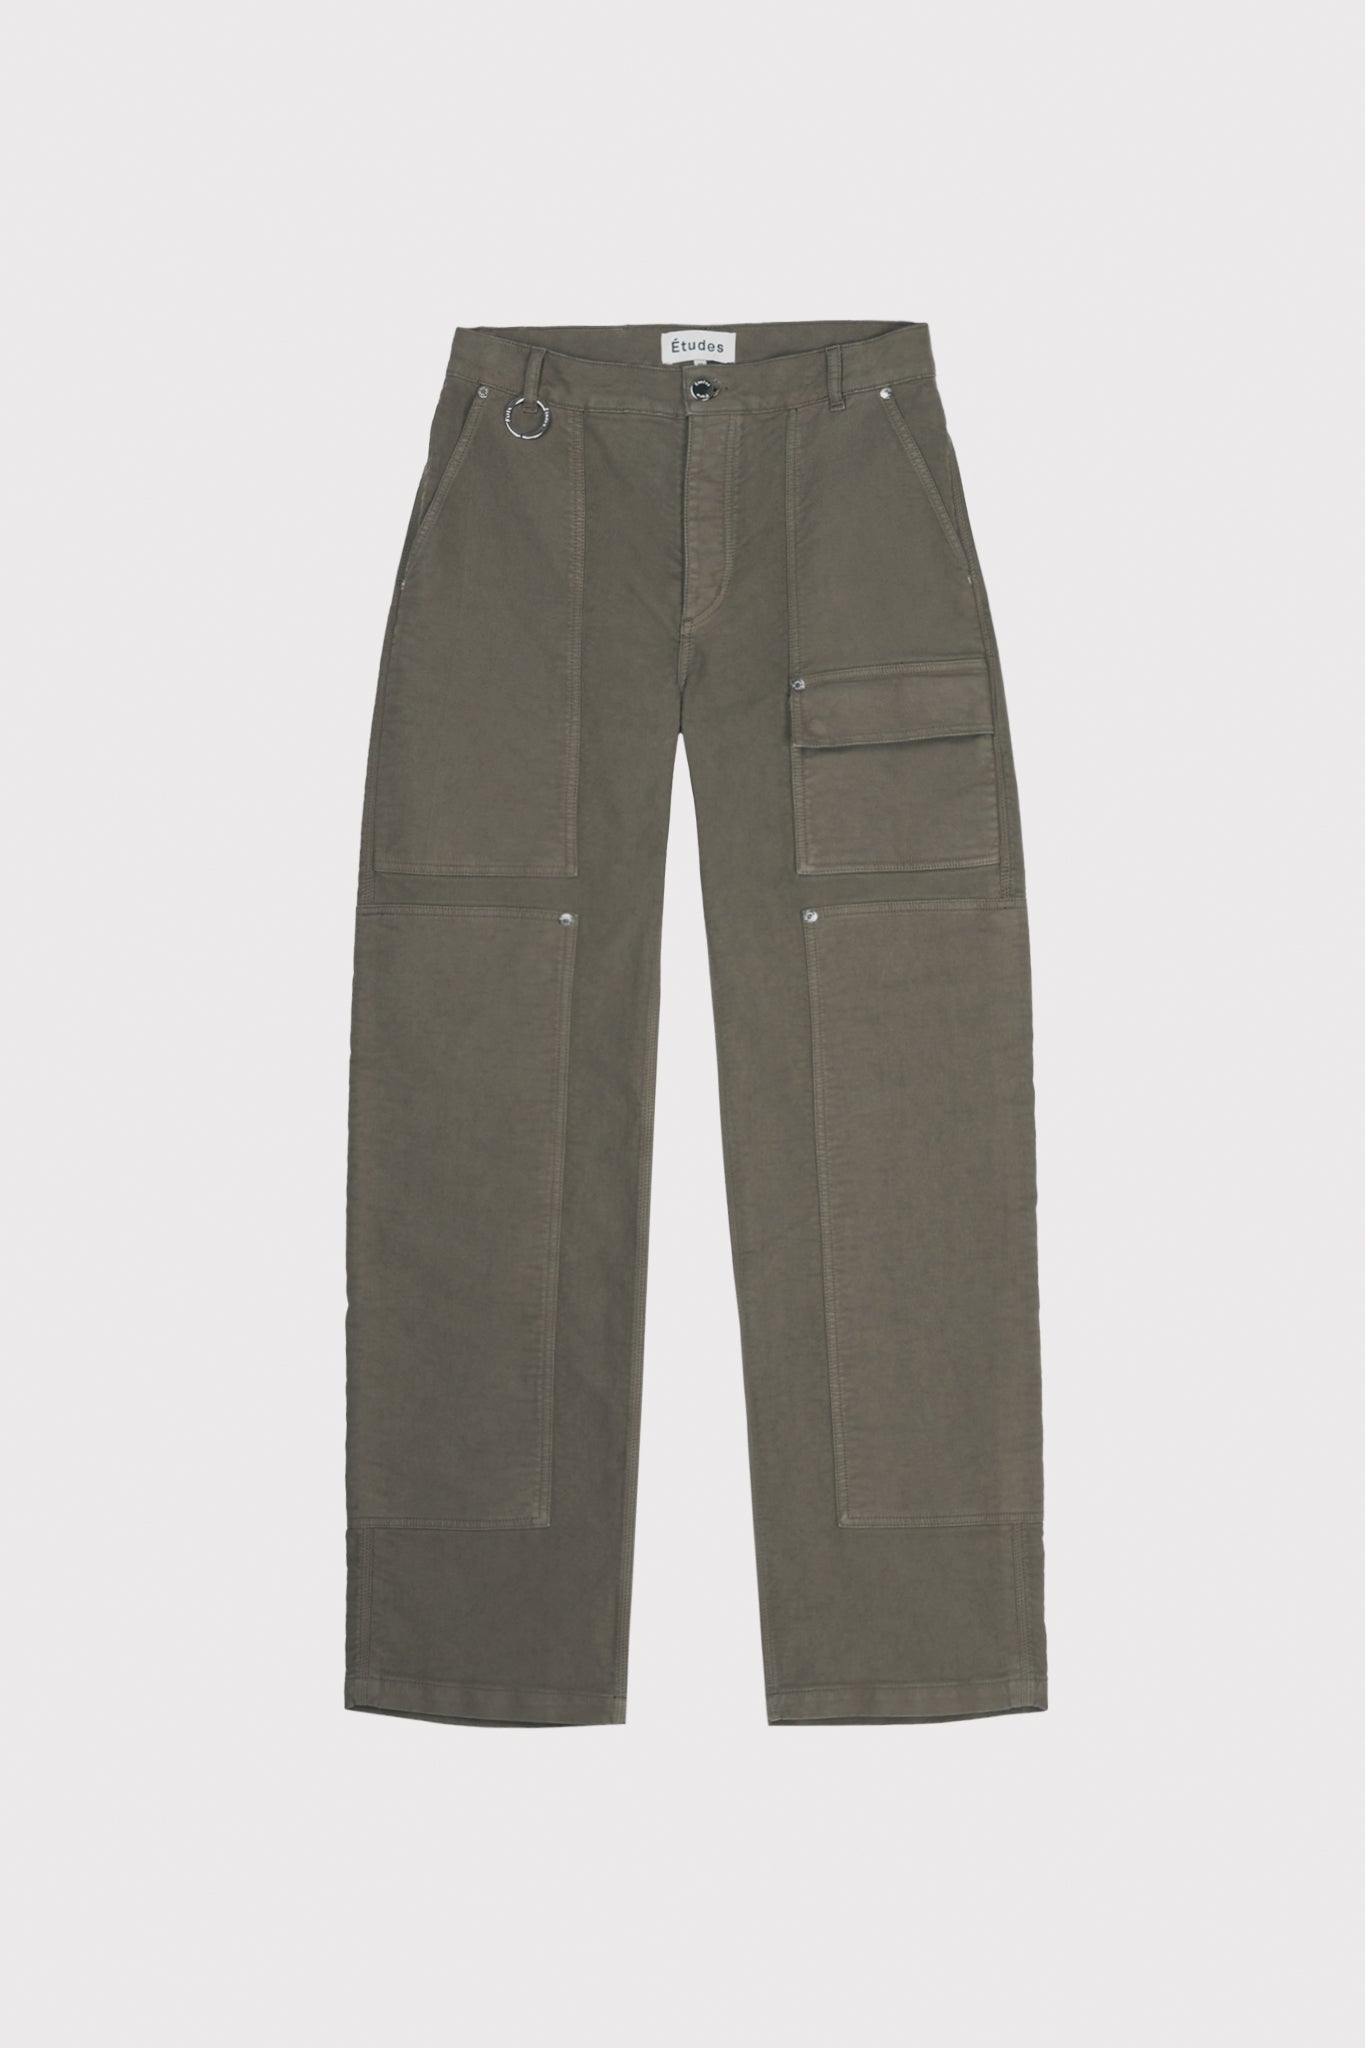 ÉTUDES TERRAIN TWILL DYED BROWN TROUSERS 2